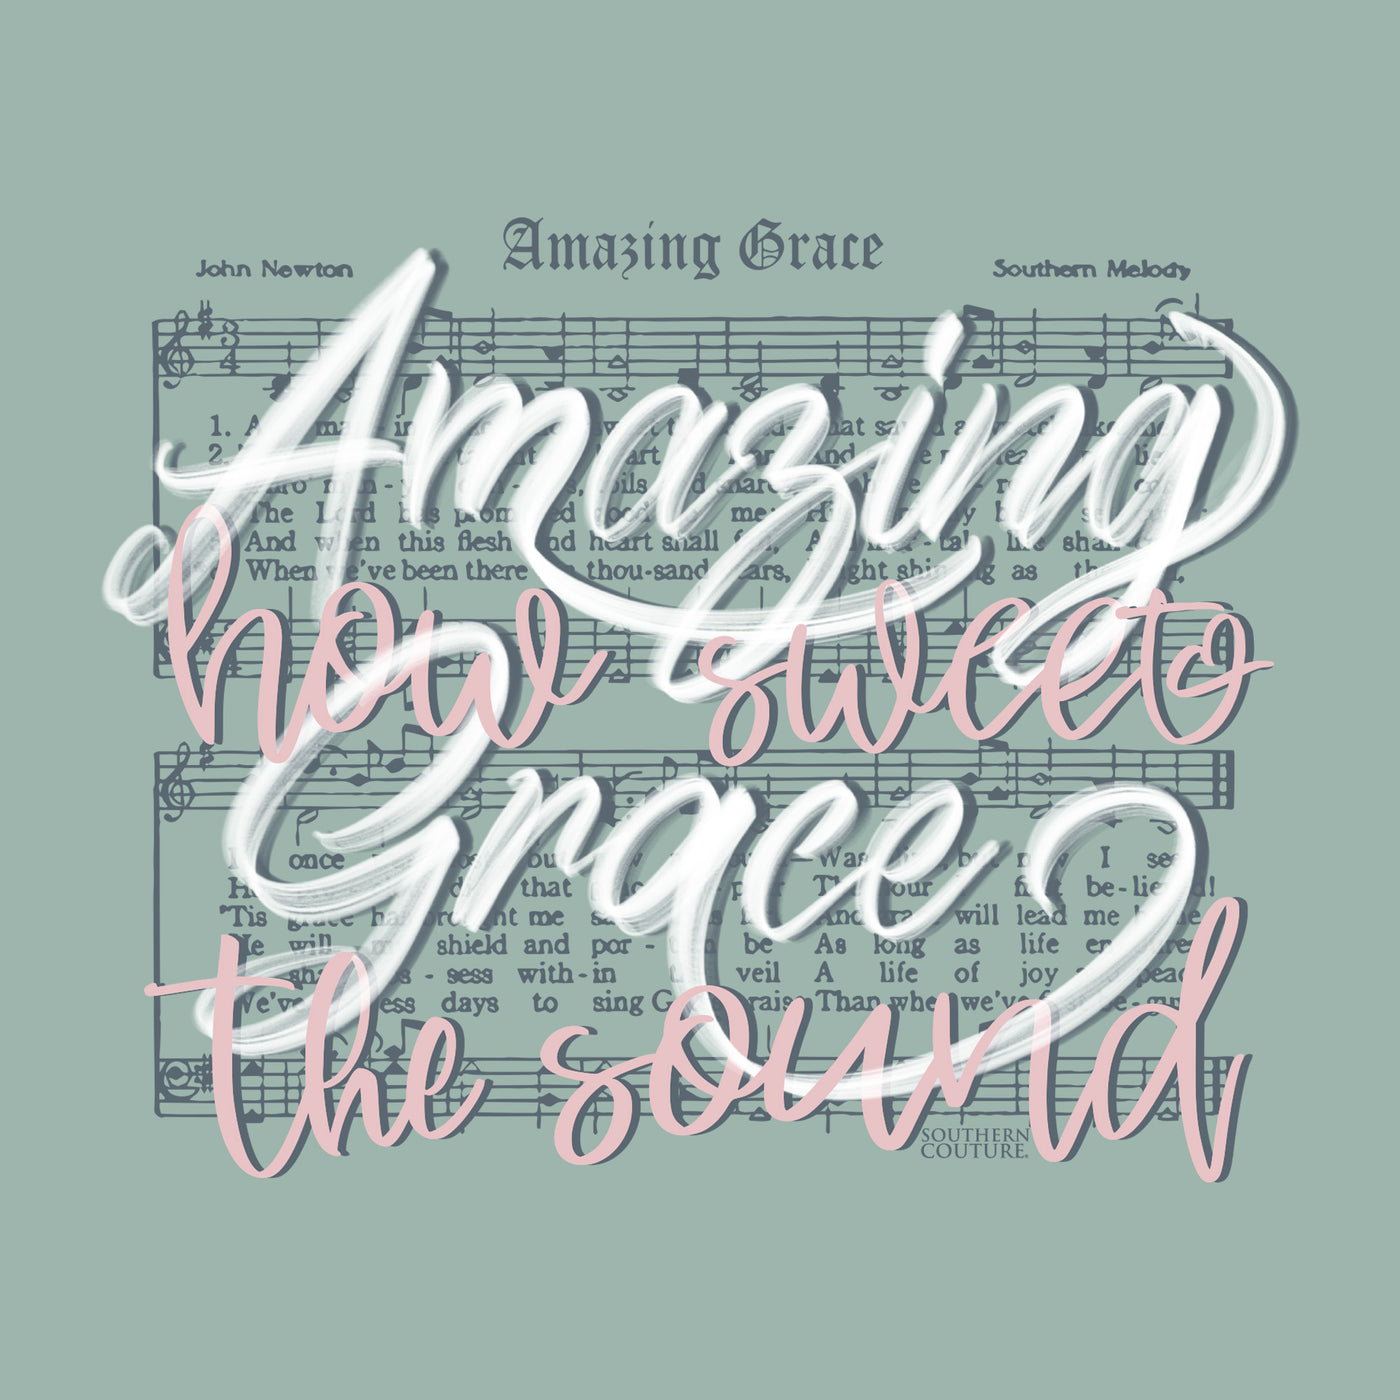 Southern Couture Amazing Grace Heather Dusty Blue SS